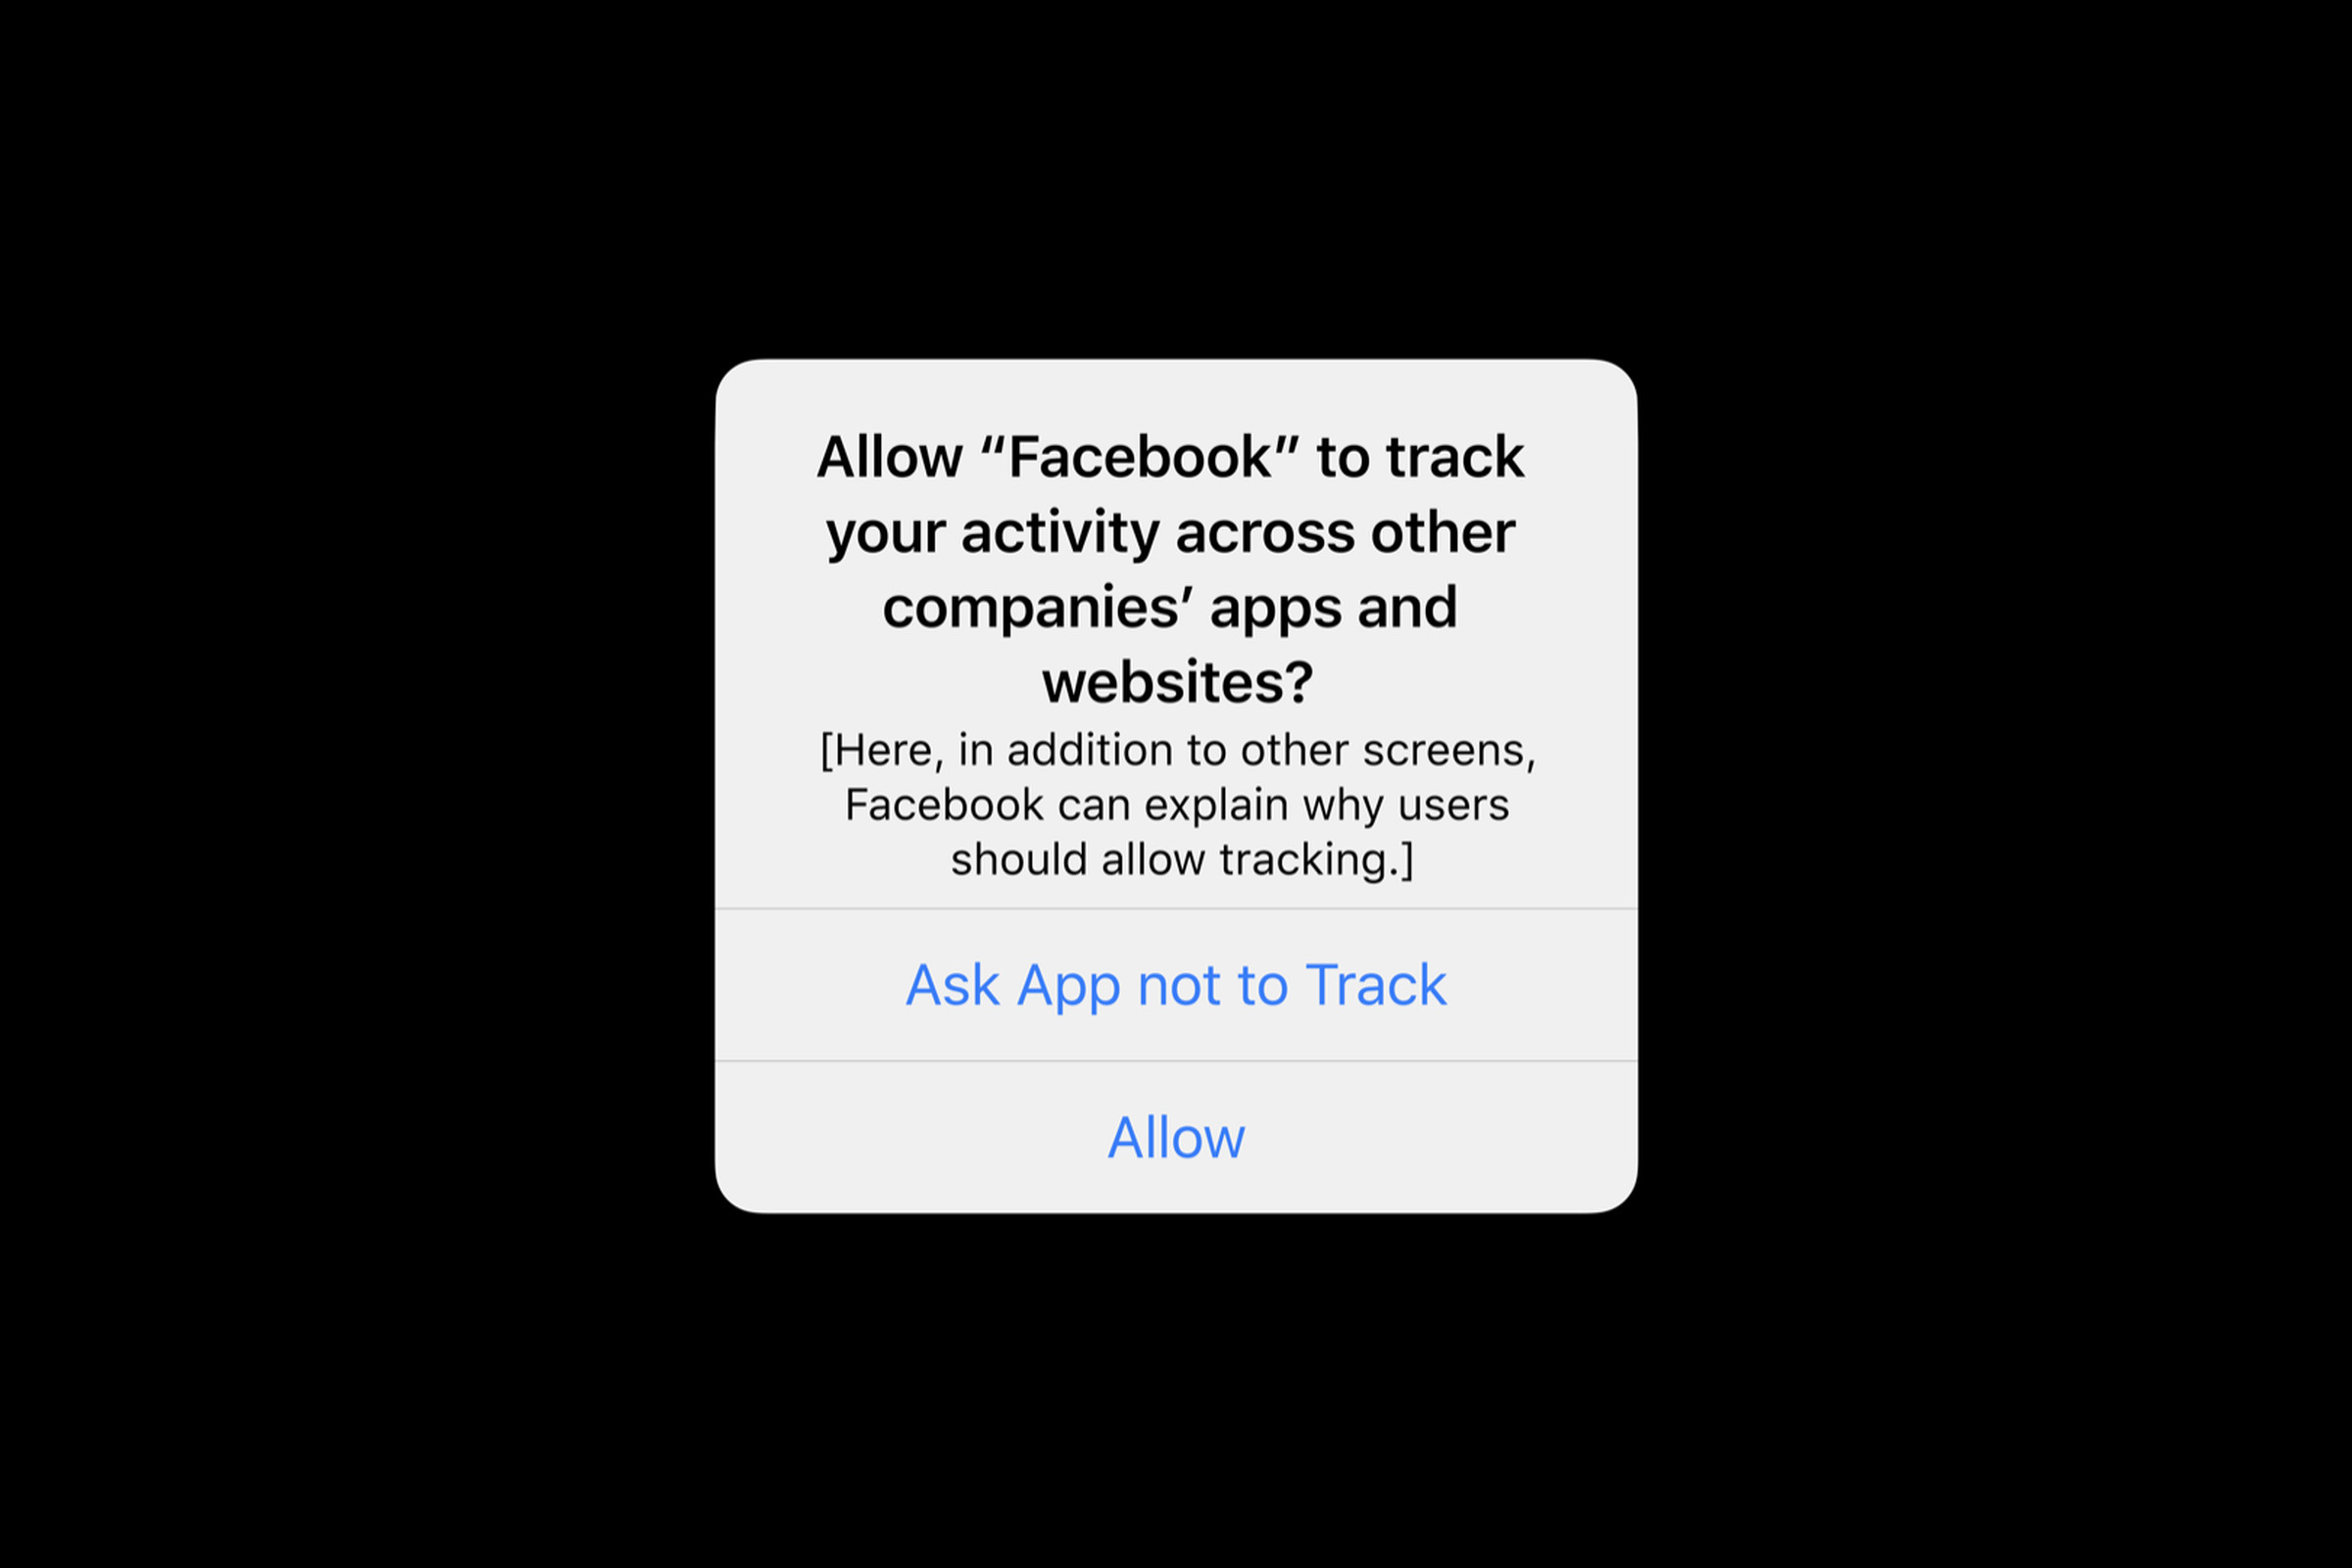 An example of the prompt you’ll see when an app asks permission to track your data.